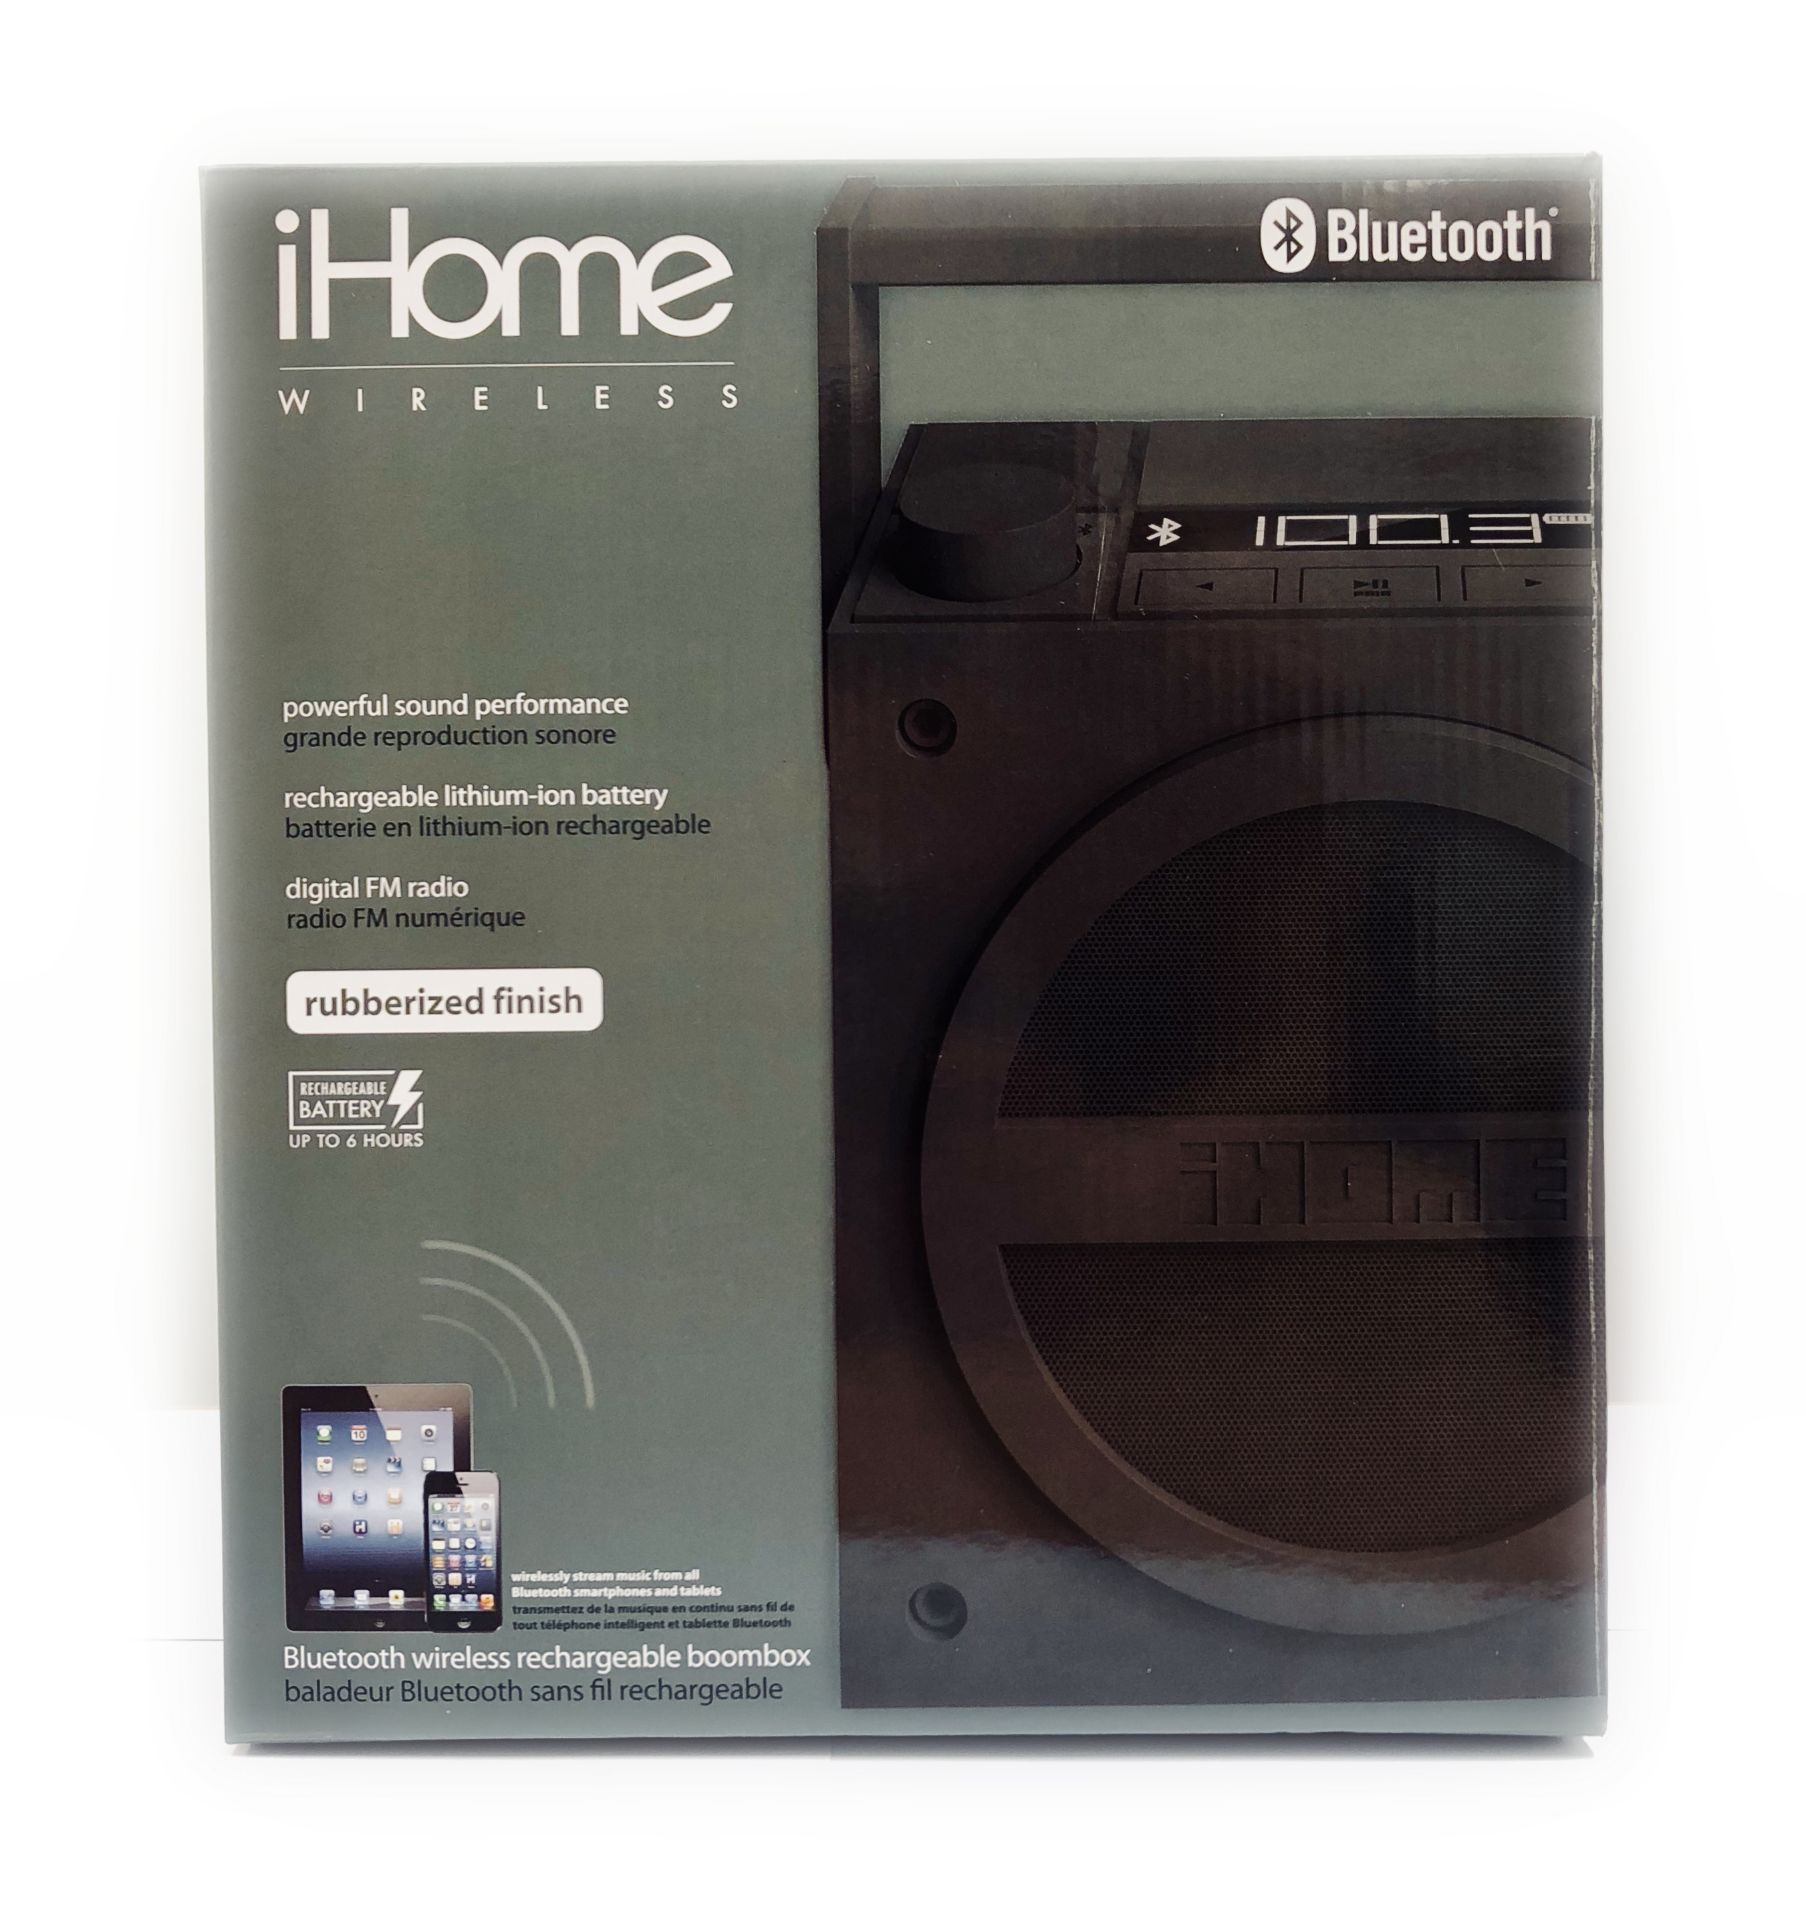 V Brand New iHome Wireless Bluetooth Rechargeable Boom Box - ISP £39.95 (Radioworld UK) - Up to 6 - Image 8 of 8